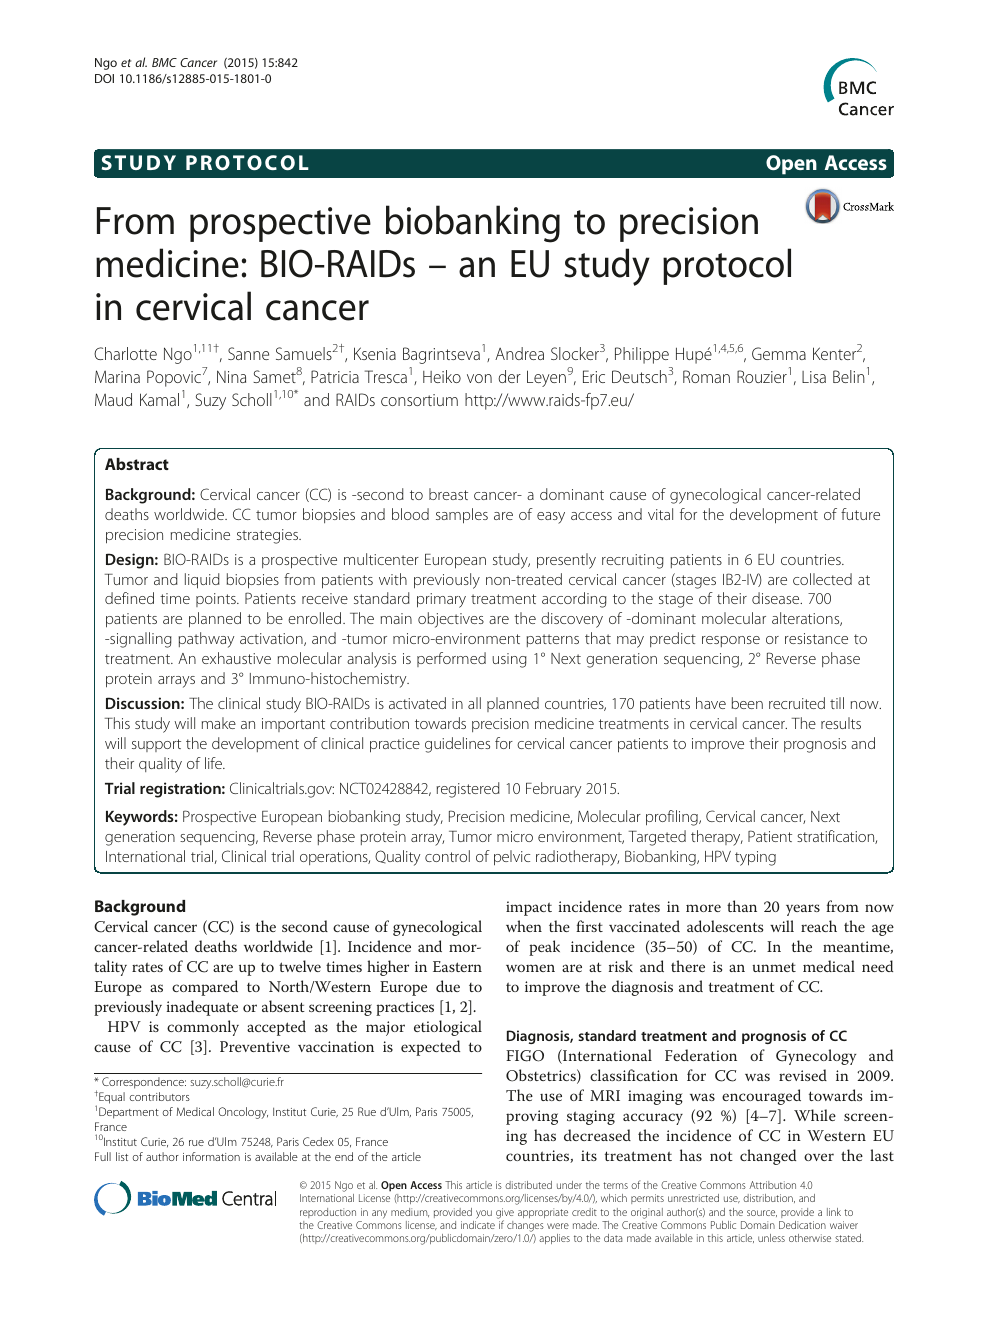 From Prospective Biobanking To Precision Medicine Bio Raids An Eu Study Protocol In Cervical Cancer Topic Of Research Paper In Clinical Medicine Download Scholarly Article Pdf And Read For Free On